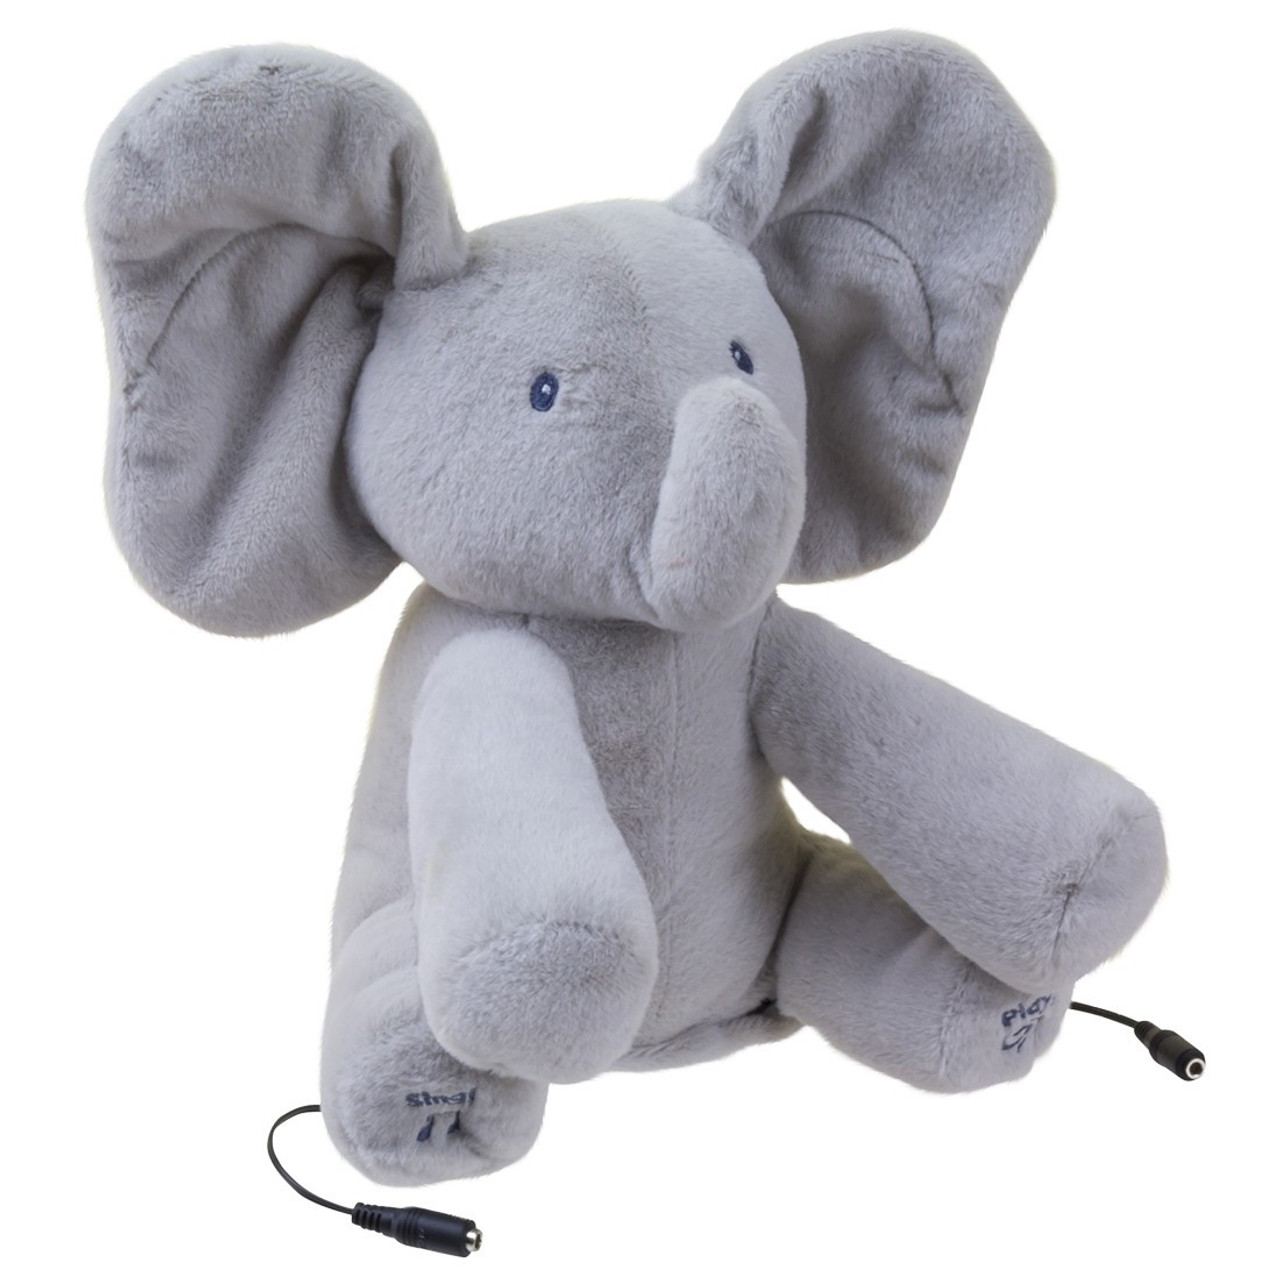 Affordable, Fun Switch Adapted Flappy the Elephant Toy